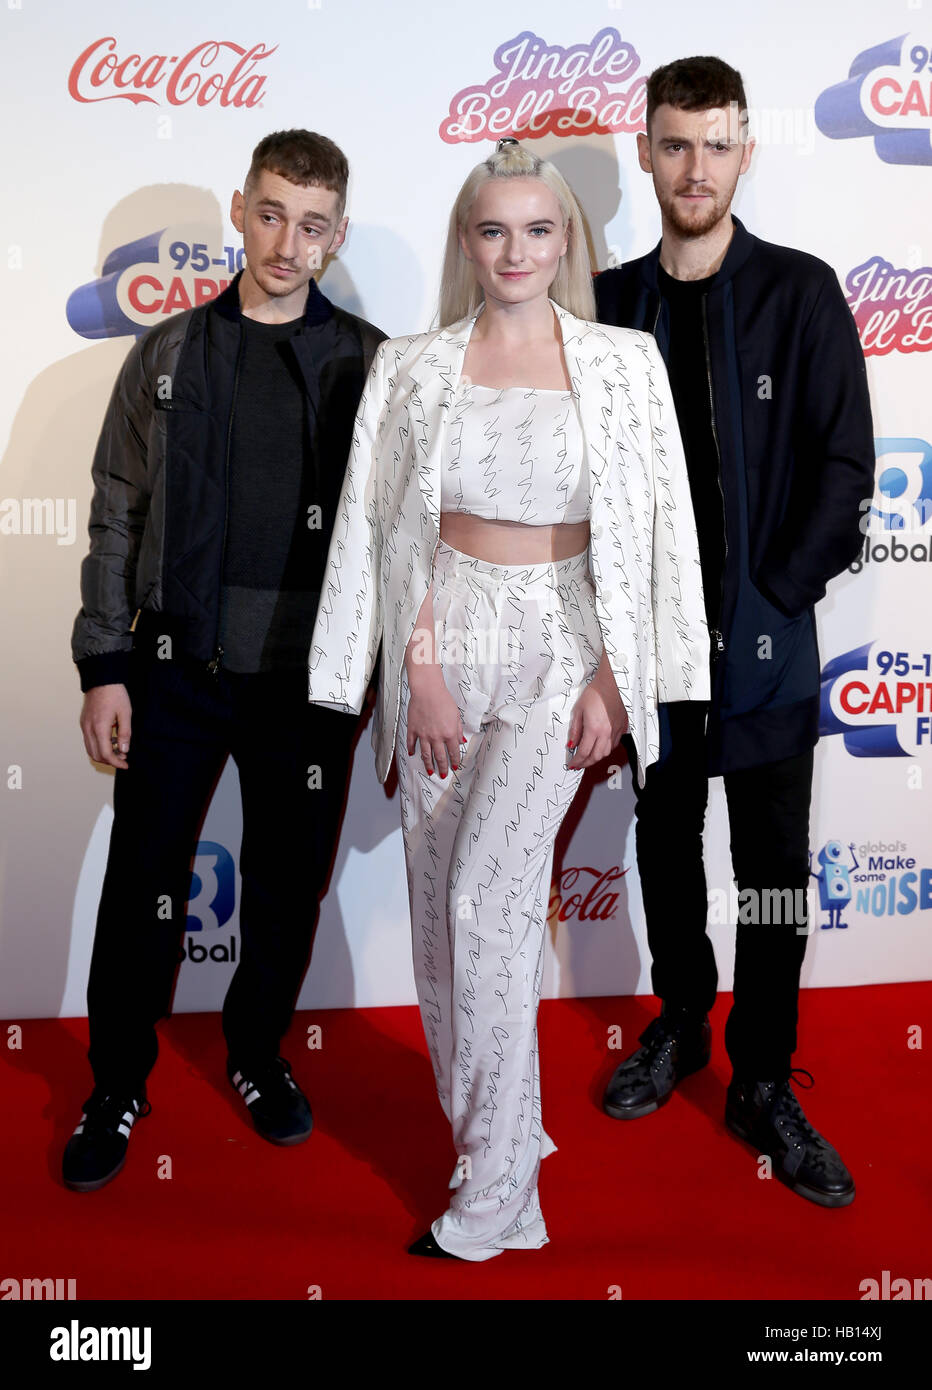 (left to right) Jack Patterson, Grace Chatto and Luke Patterson of Clean Bandit during Capital's Jingle Bell Ball with Coca-Cola at London's O2 arena. PRESS ASSOCIATION Photo. Picture date: Saturday 3rd December 2016. Photo credit should read: Daniel Leal-Olivas/PA Wire Stock Photo